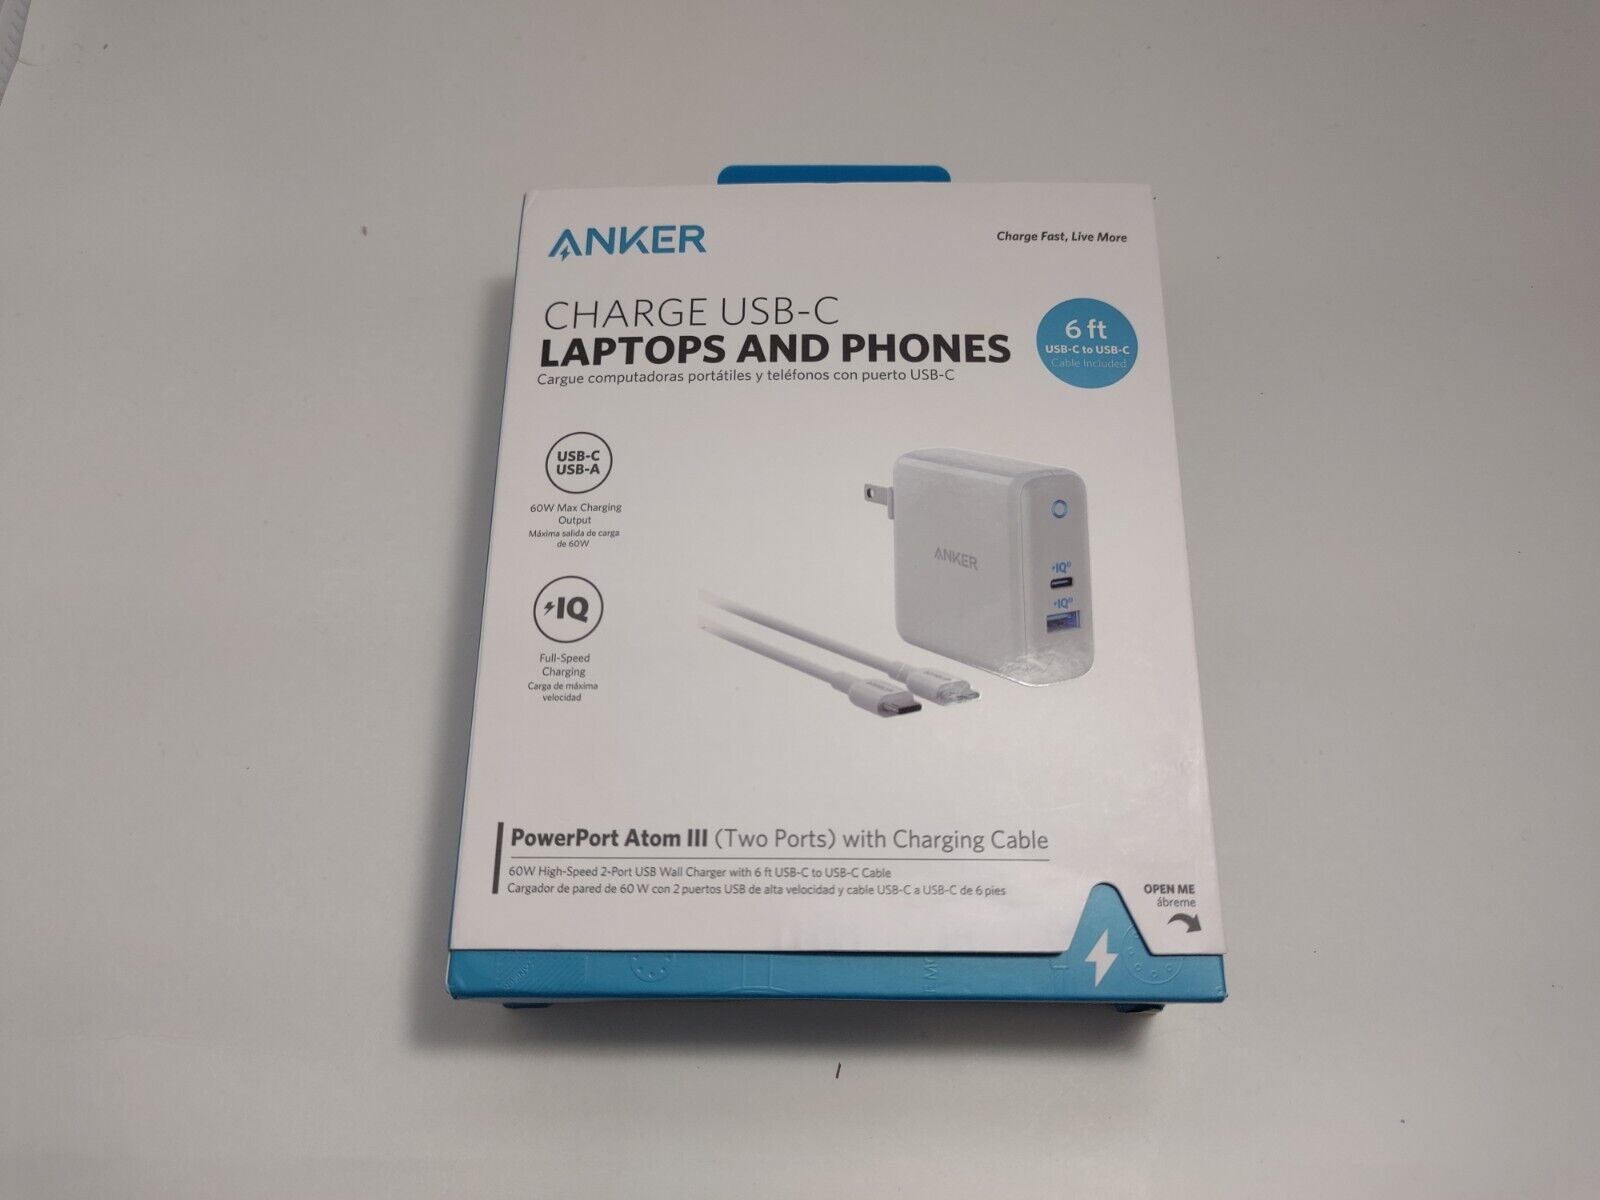 Anker 6' USB-C 60W Power Port Atom III Two Ports w Charging Cable (Open box)